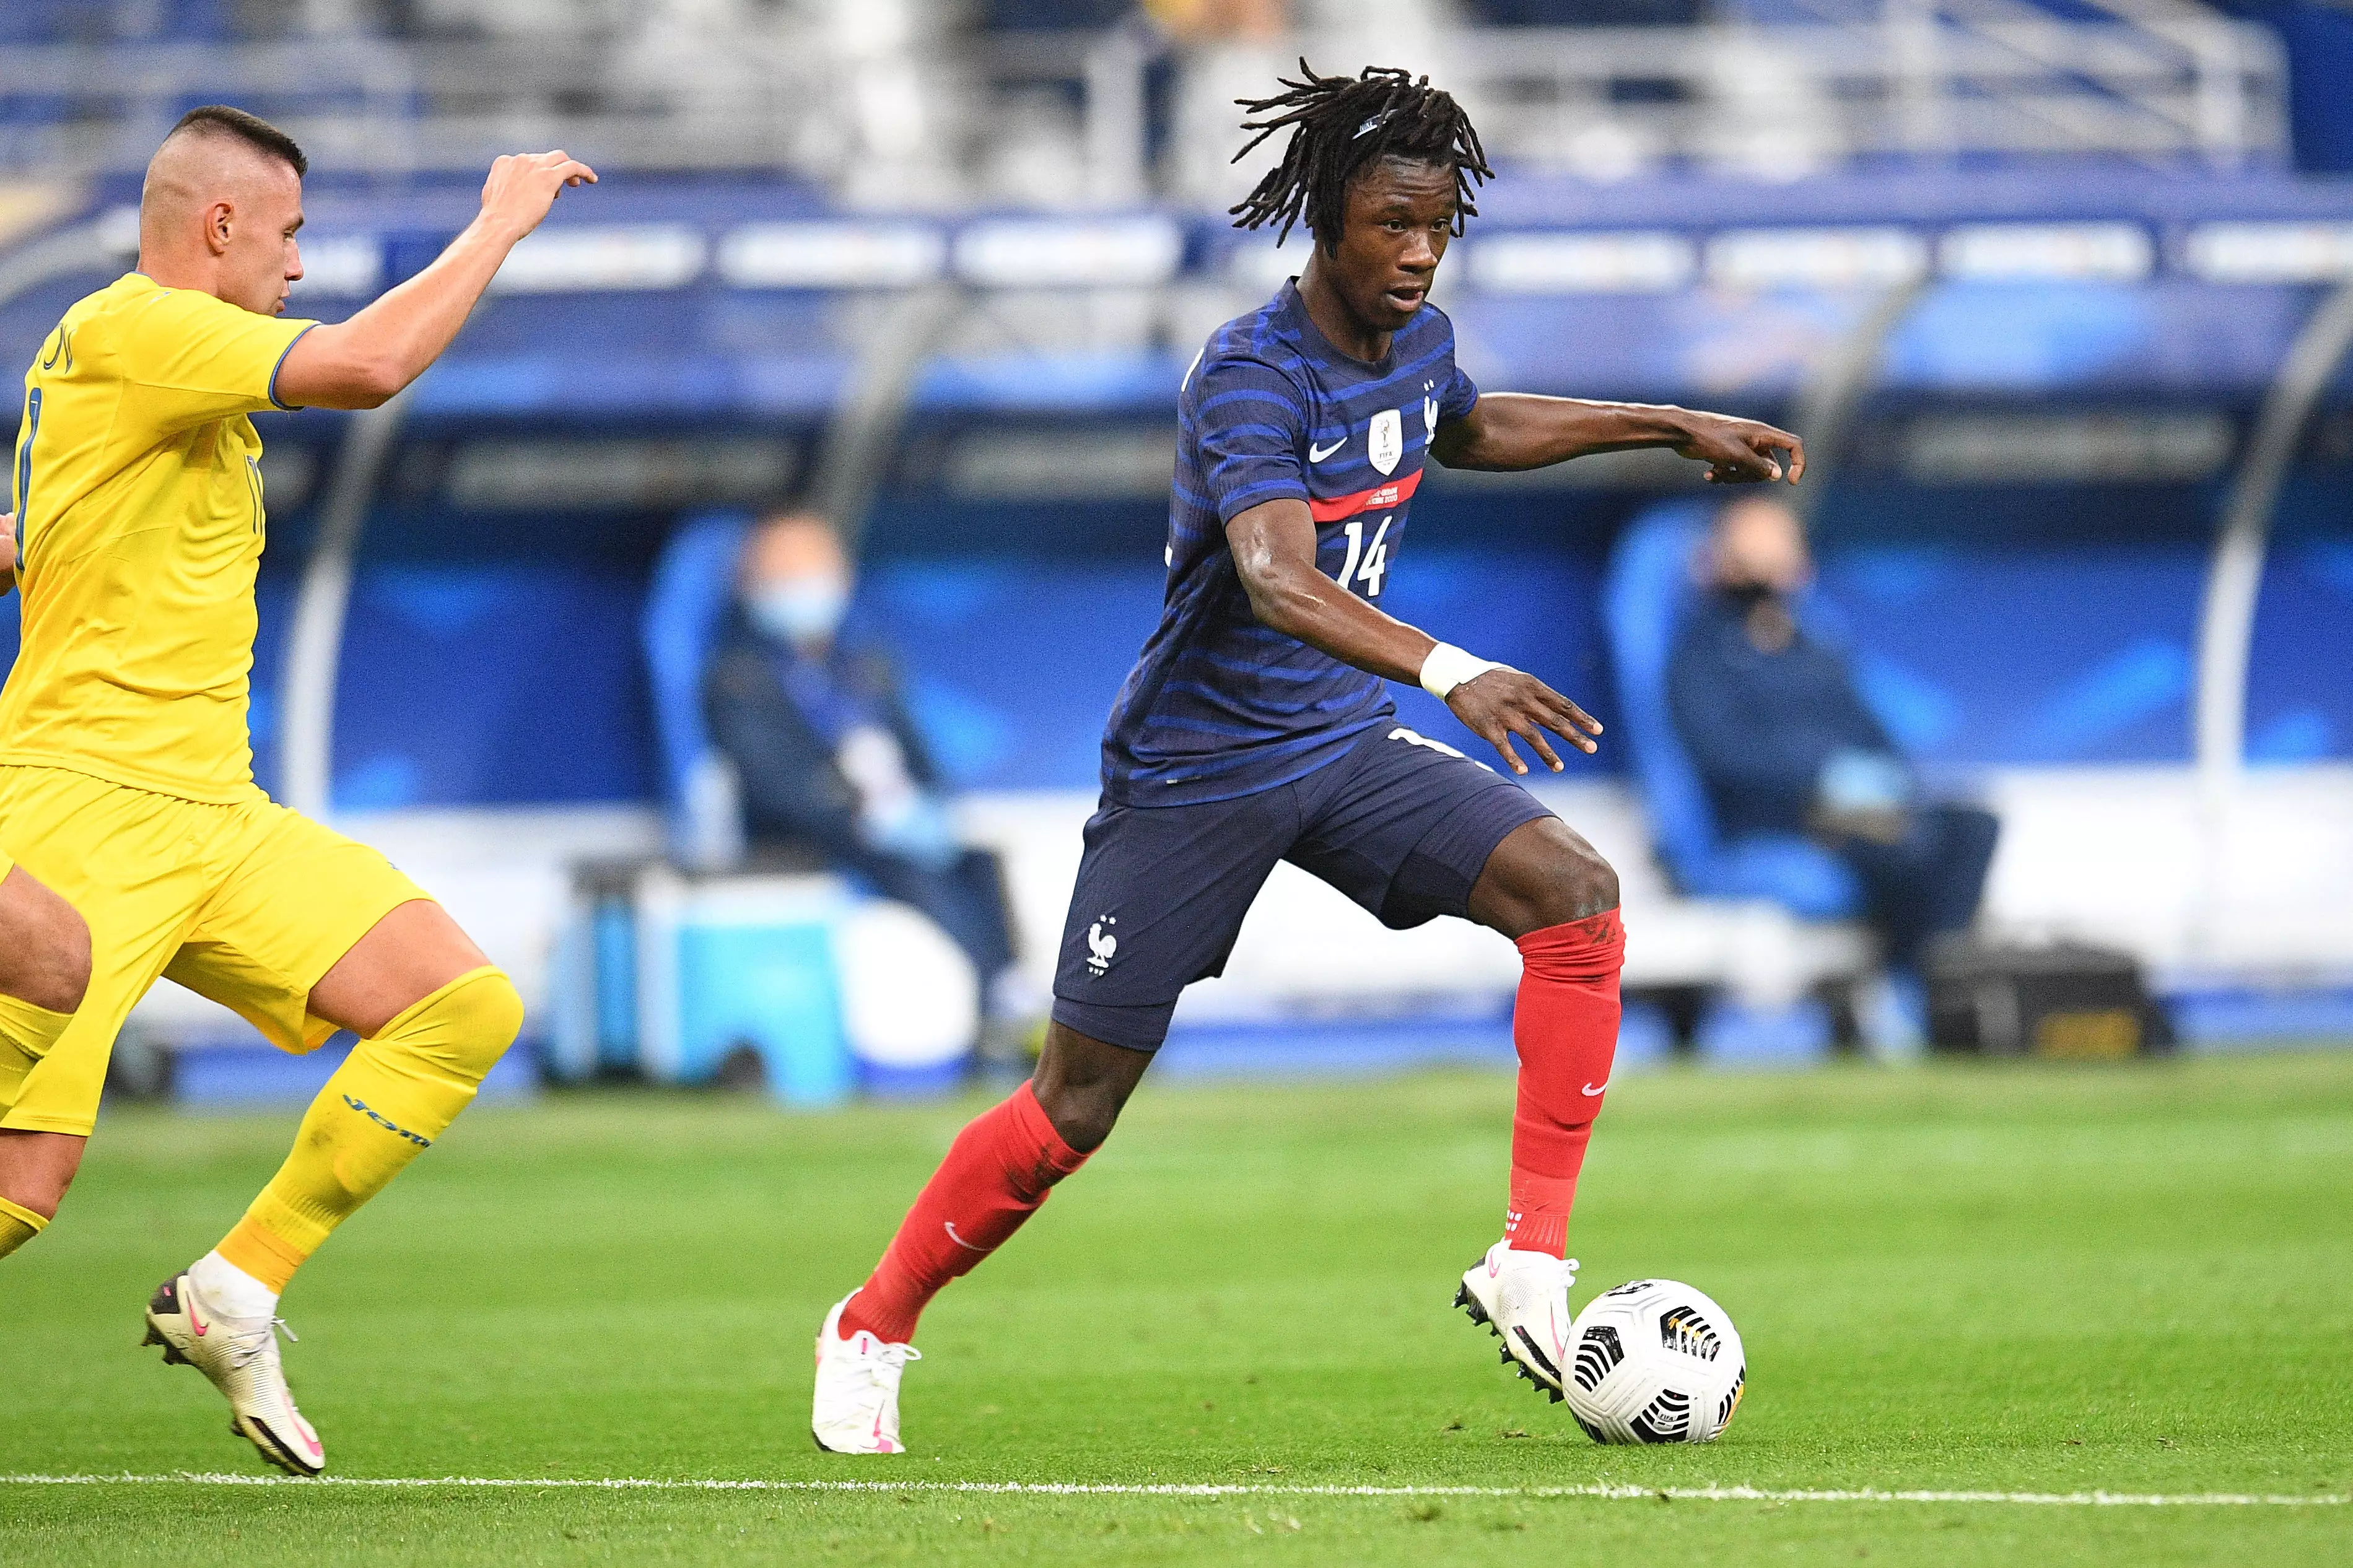 Camavinga already has three caps for France and has scored once. Image: PA Images